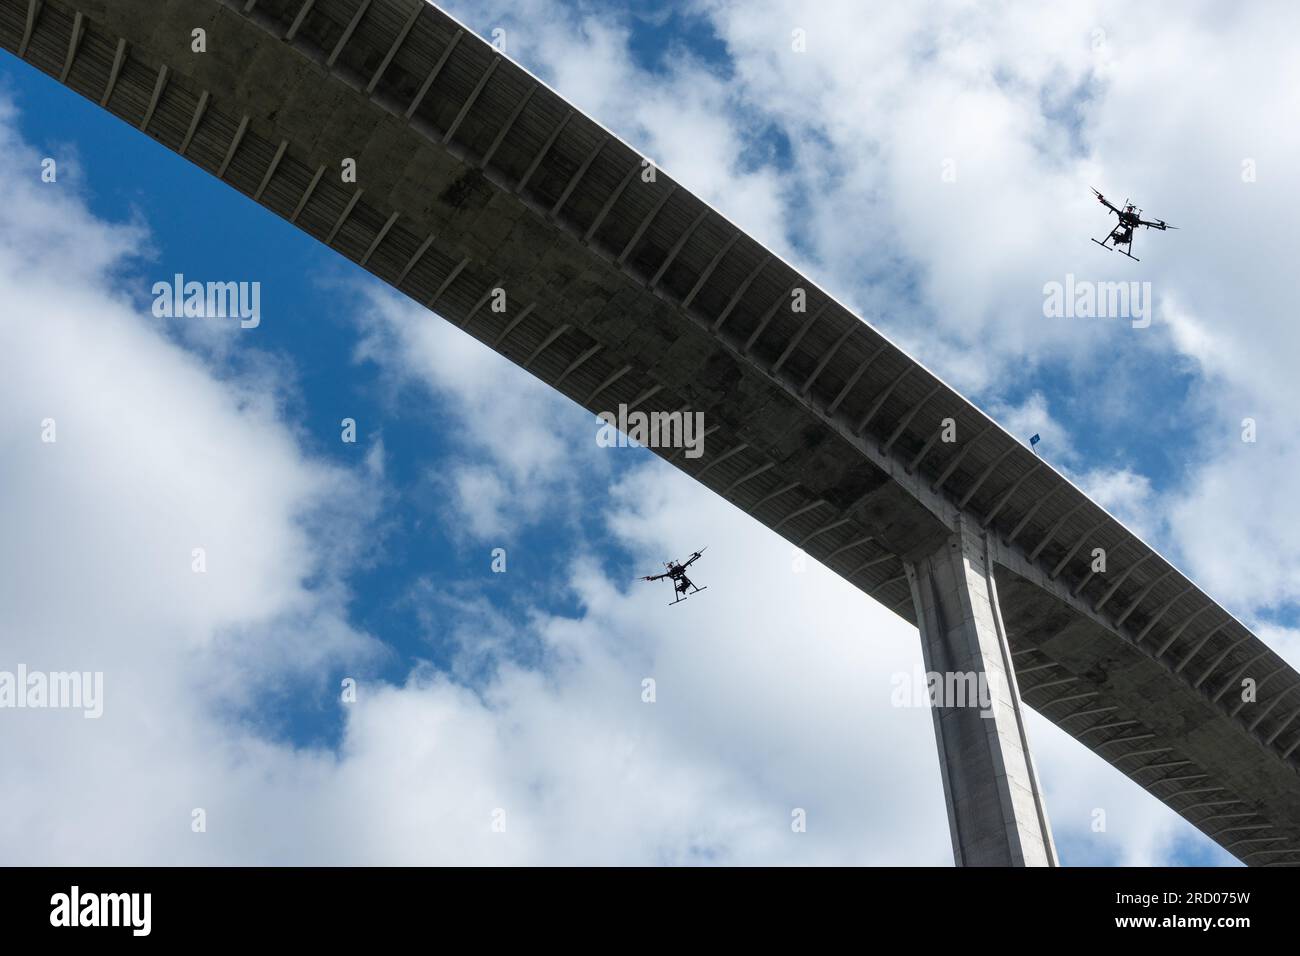 Drones flying above bridge. Drone attack, drone traffic control, police, military drone... concept Stock Photo